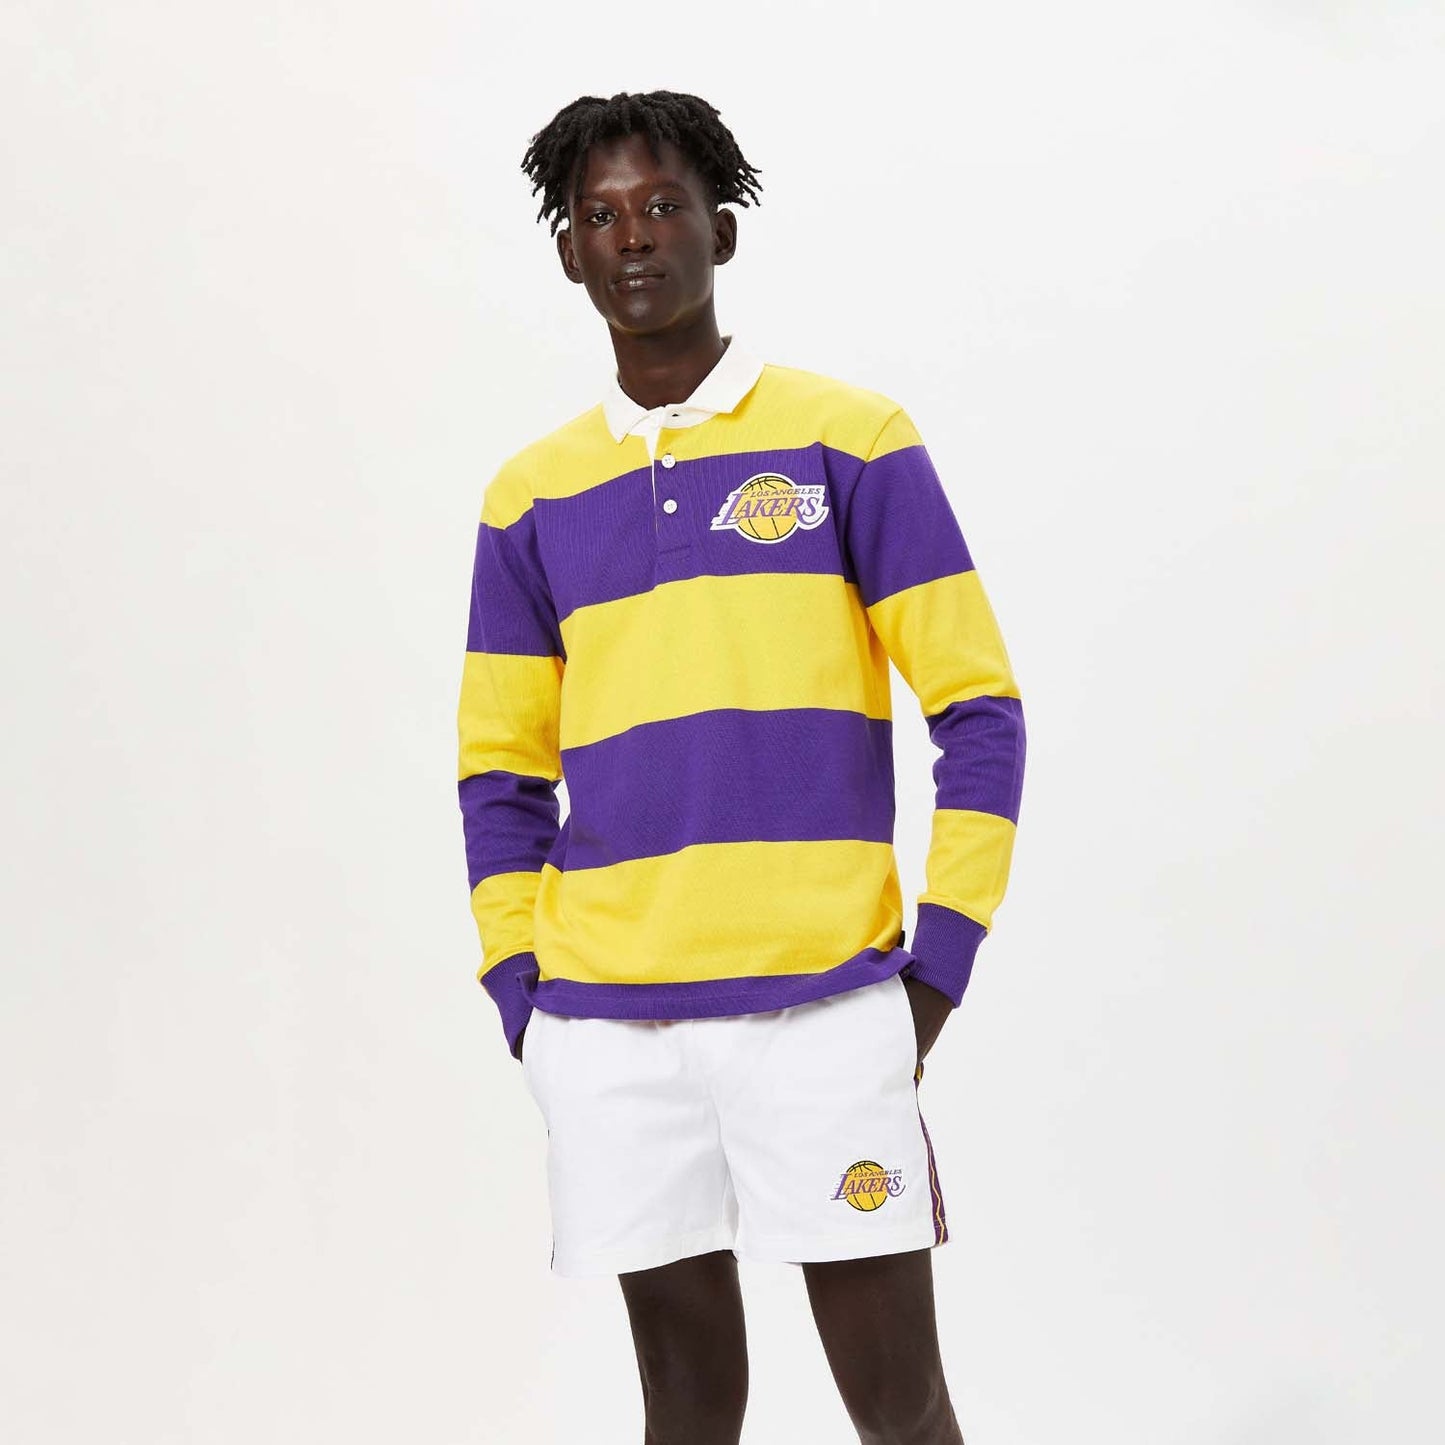 Rowing Blazers x NBA Los Angeles Lakers Rugby Shorts